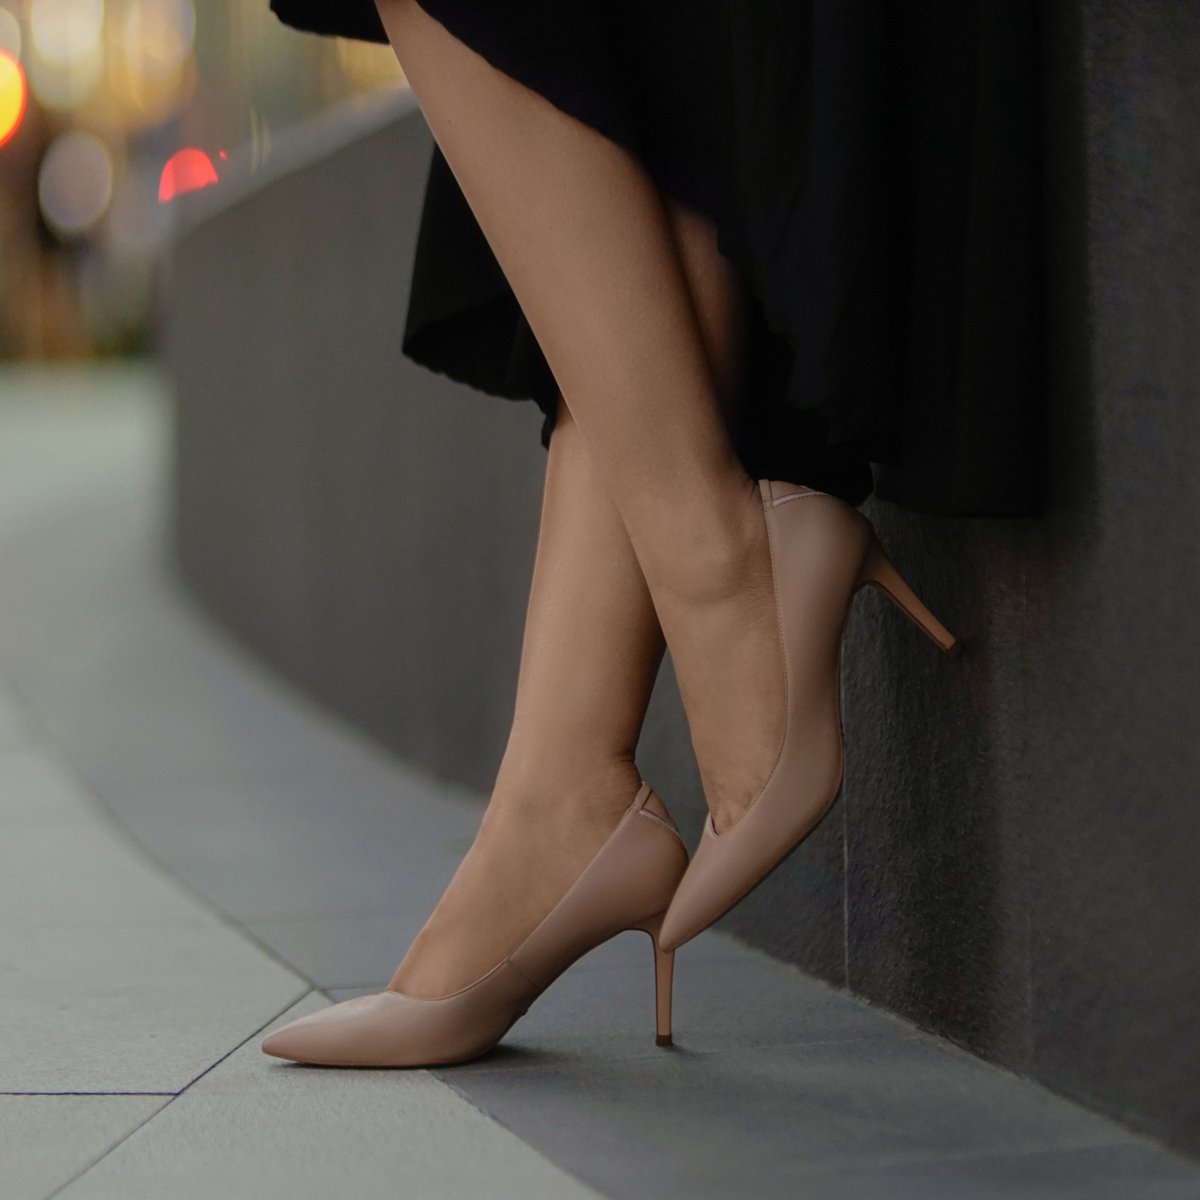 A forever staple in your closet—classic nude pumps but better because they are vegan. Can you believe these are made from recycled materials? More fashion, less footprint. ♻️

#VEERAH
#VEERAHwarriors
#DoGoodLookIncredible
#veganshoes
#recycledmaterials
#nudepumps
#EarthMonth